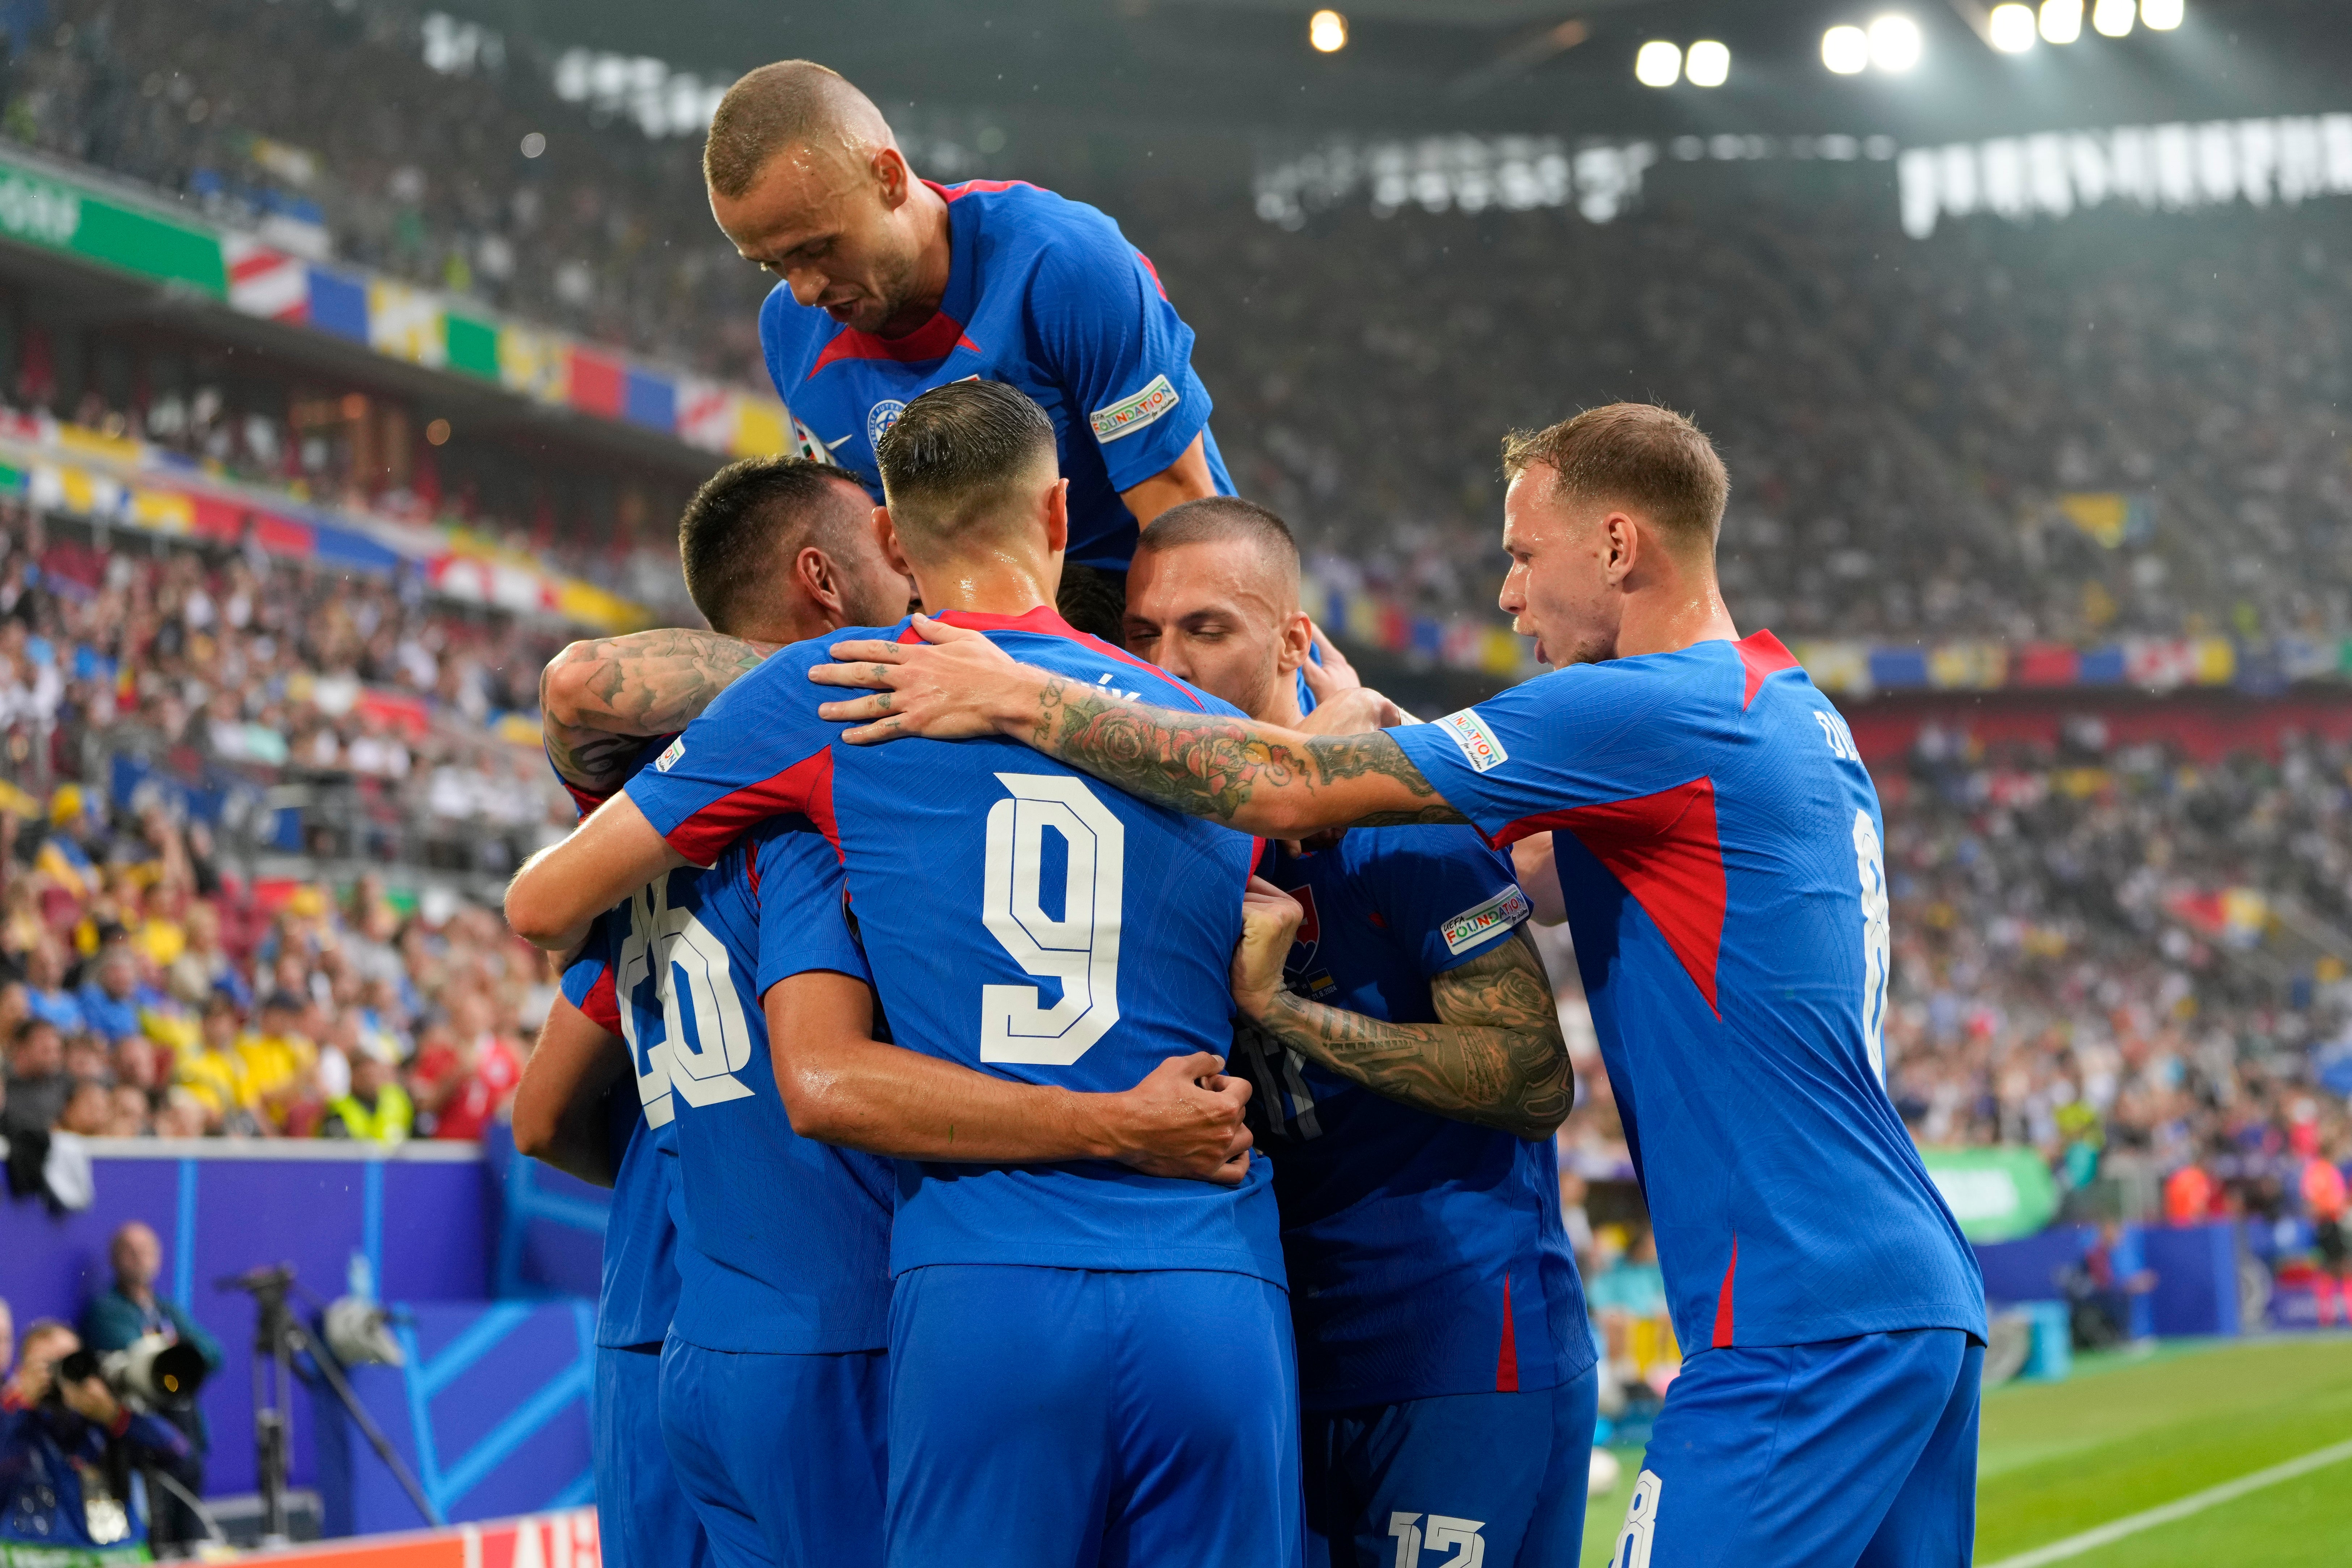 With Belgium already beaten, Slovakia have their sights set on another famous win as they prepare to face England in the last-16